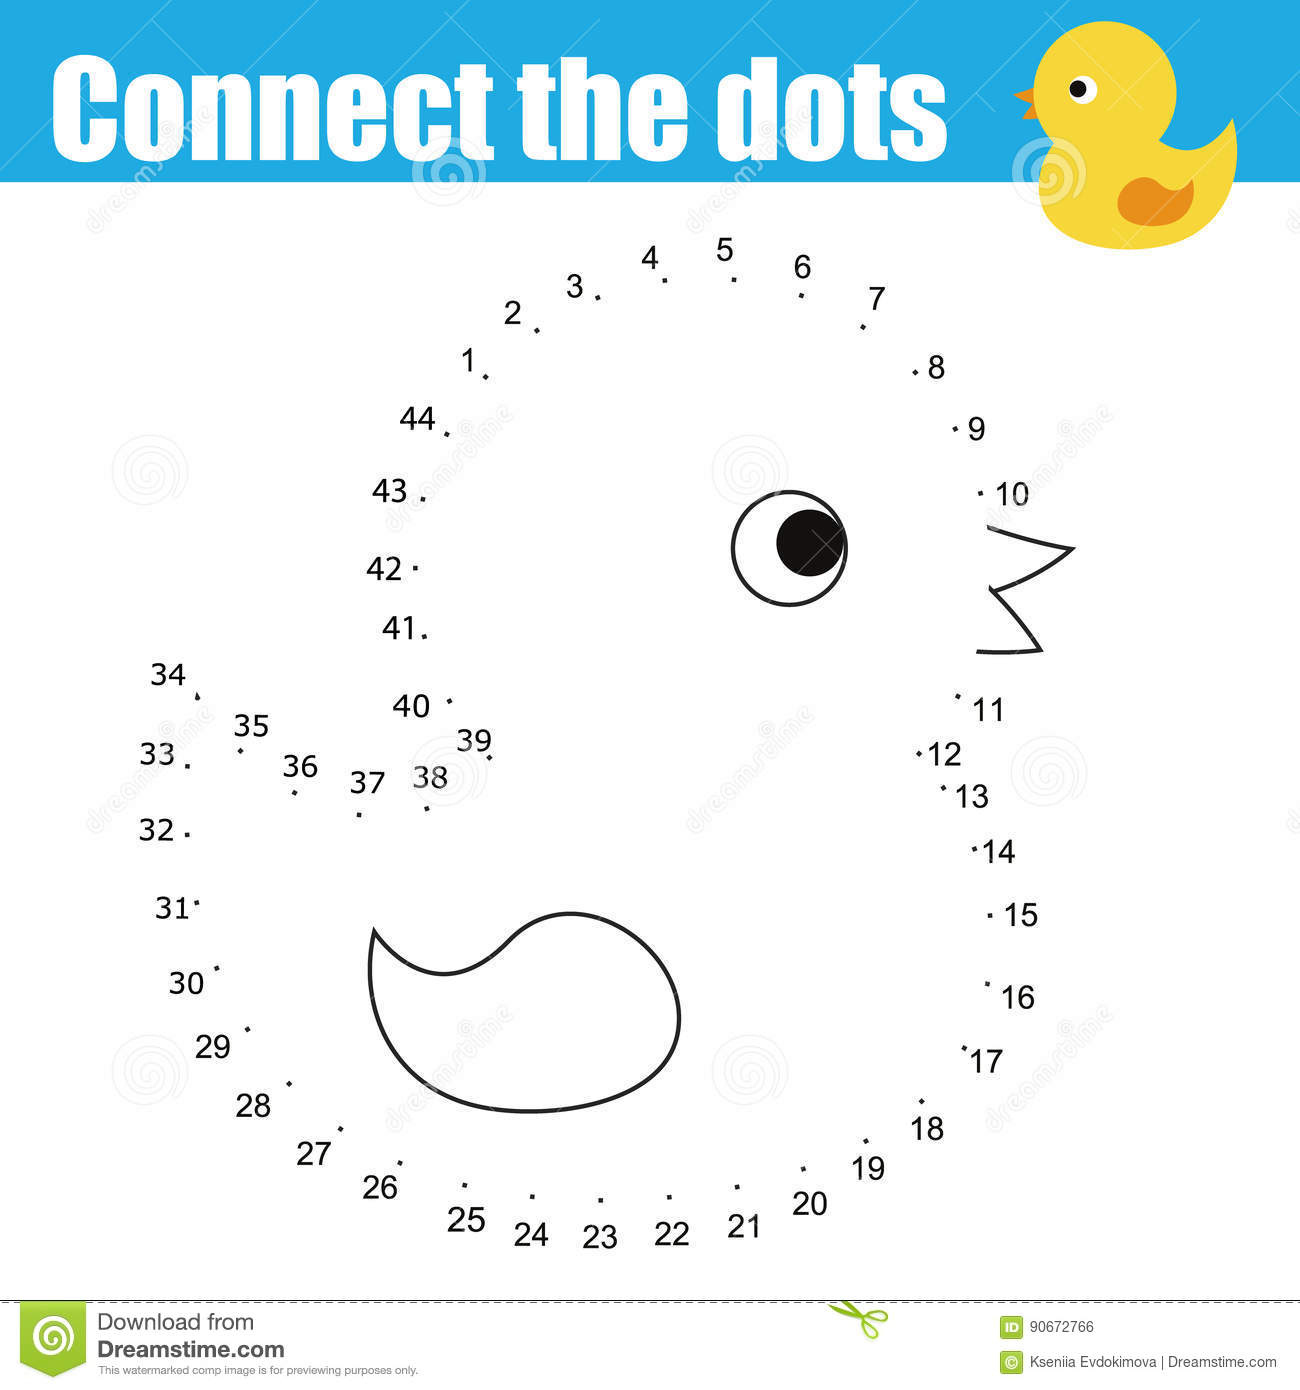 numbers-connect-the-dots-connect-the-dots-printable